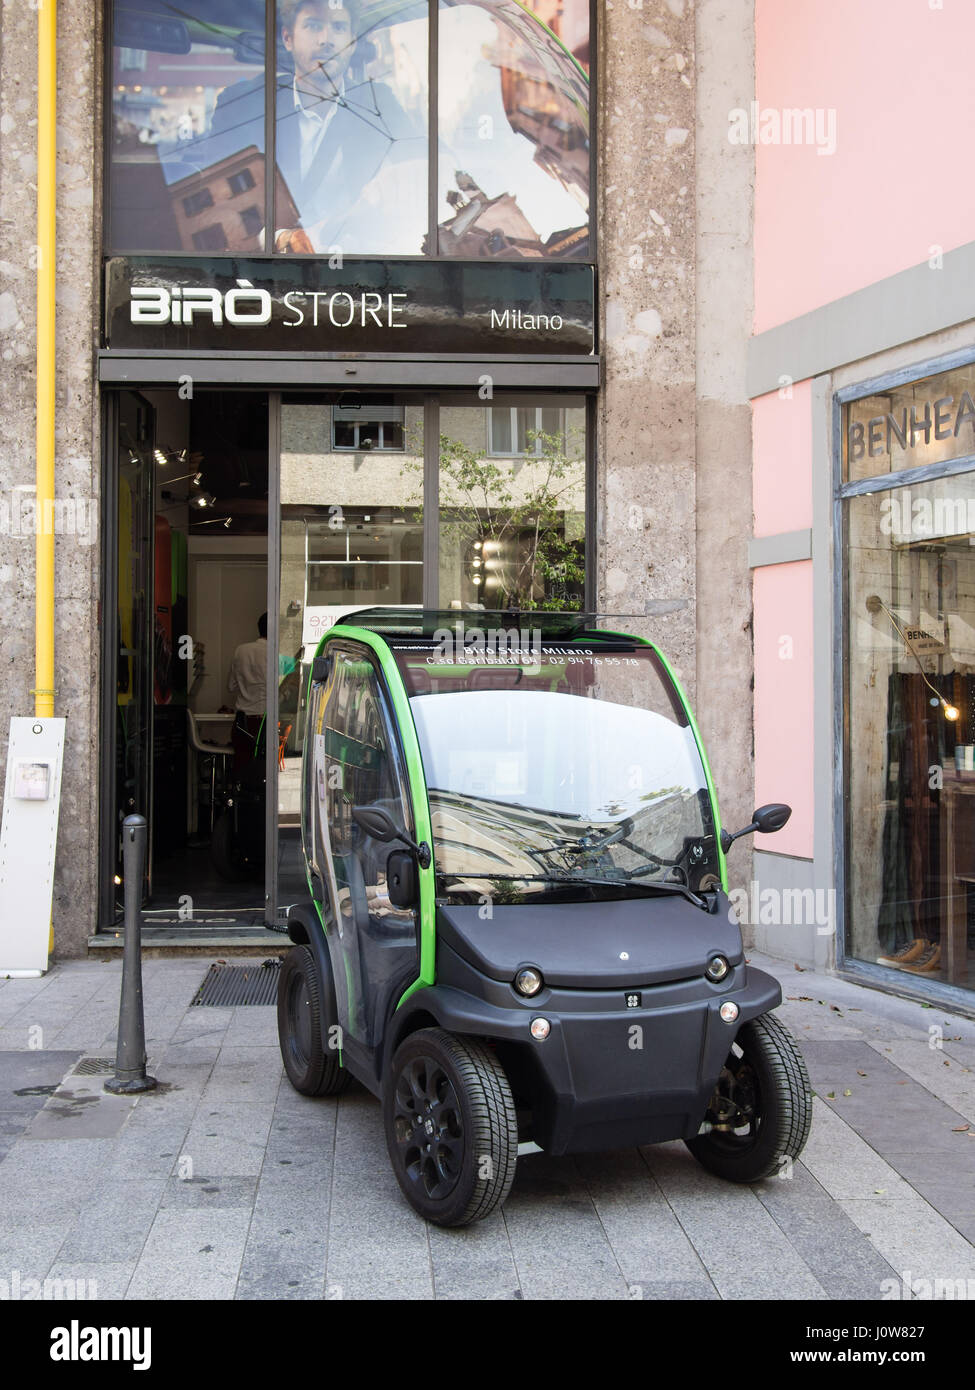 Biro , electrical smart city car designed in Italy, store in Milan, Italy Stock Photo